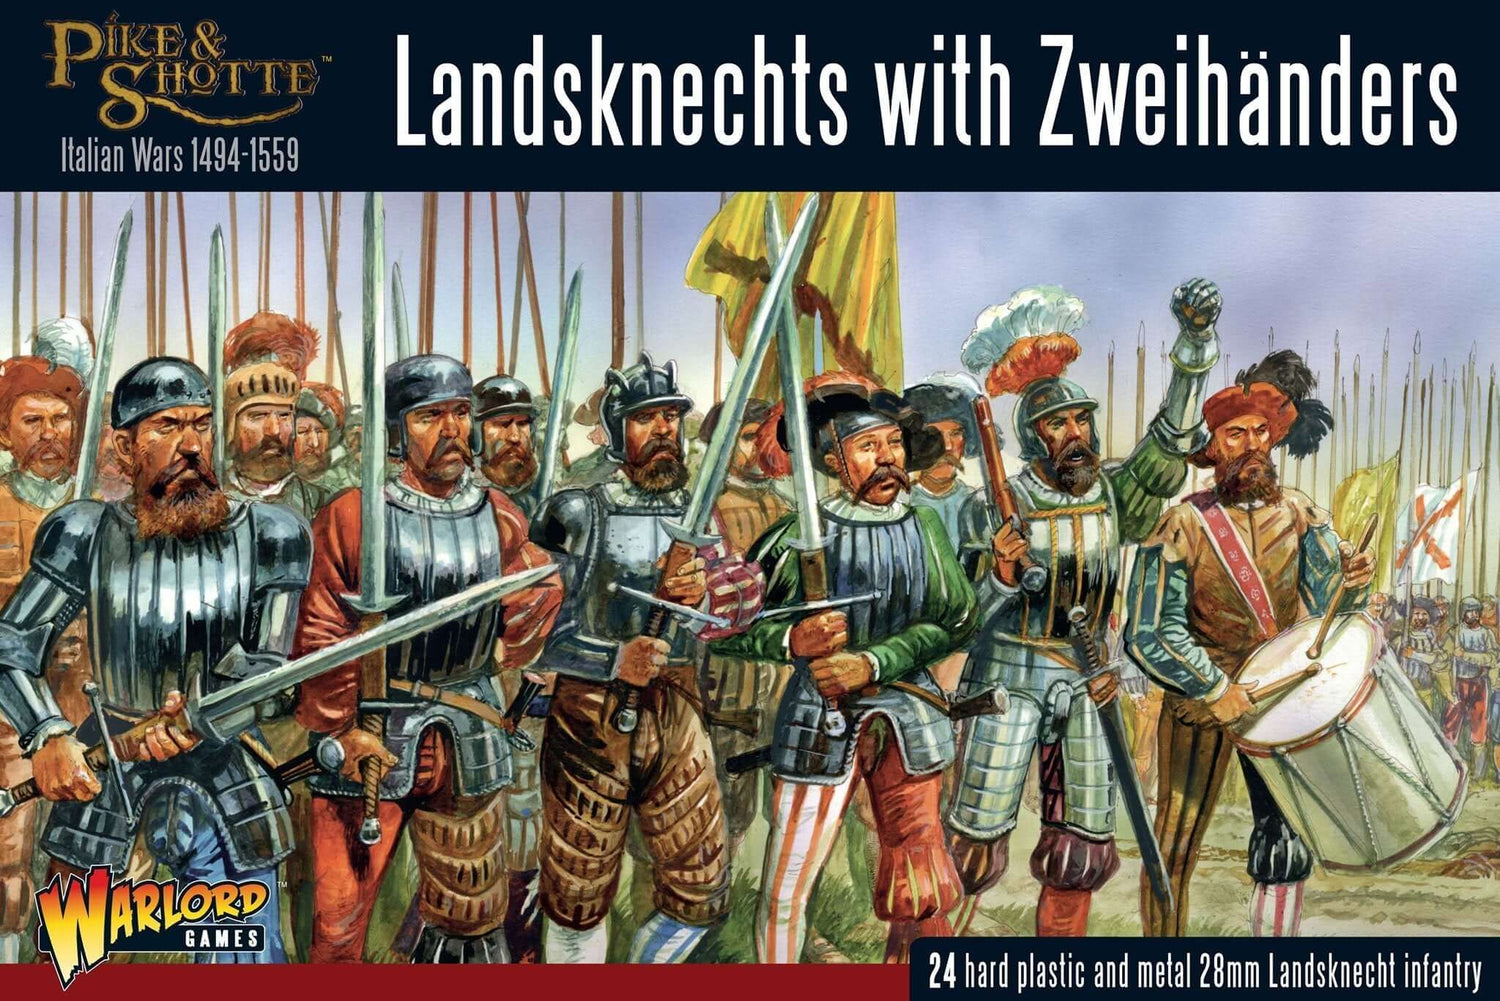 Pike & Shotte, Landsknechts with Zweihanders by Warlord